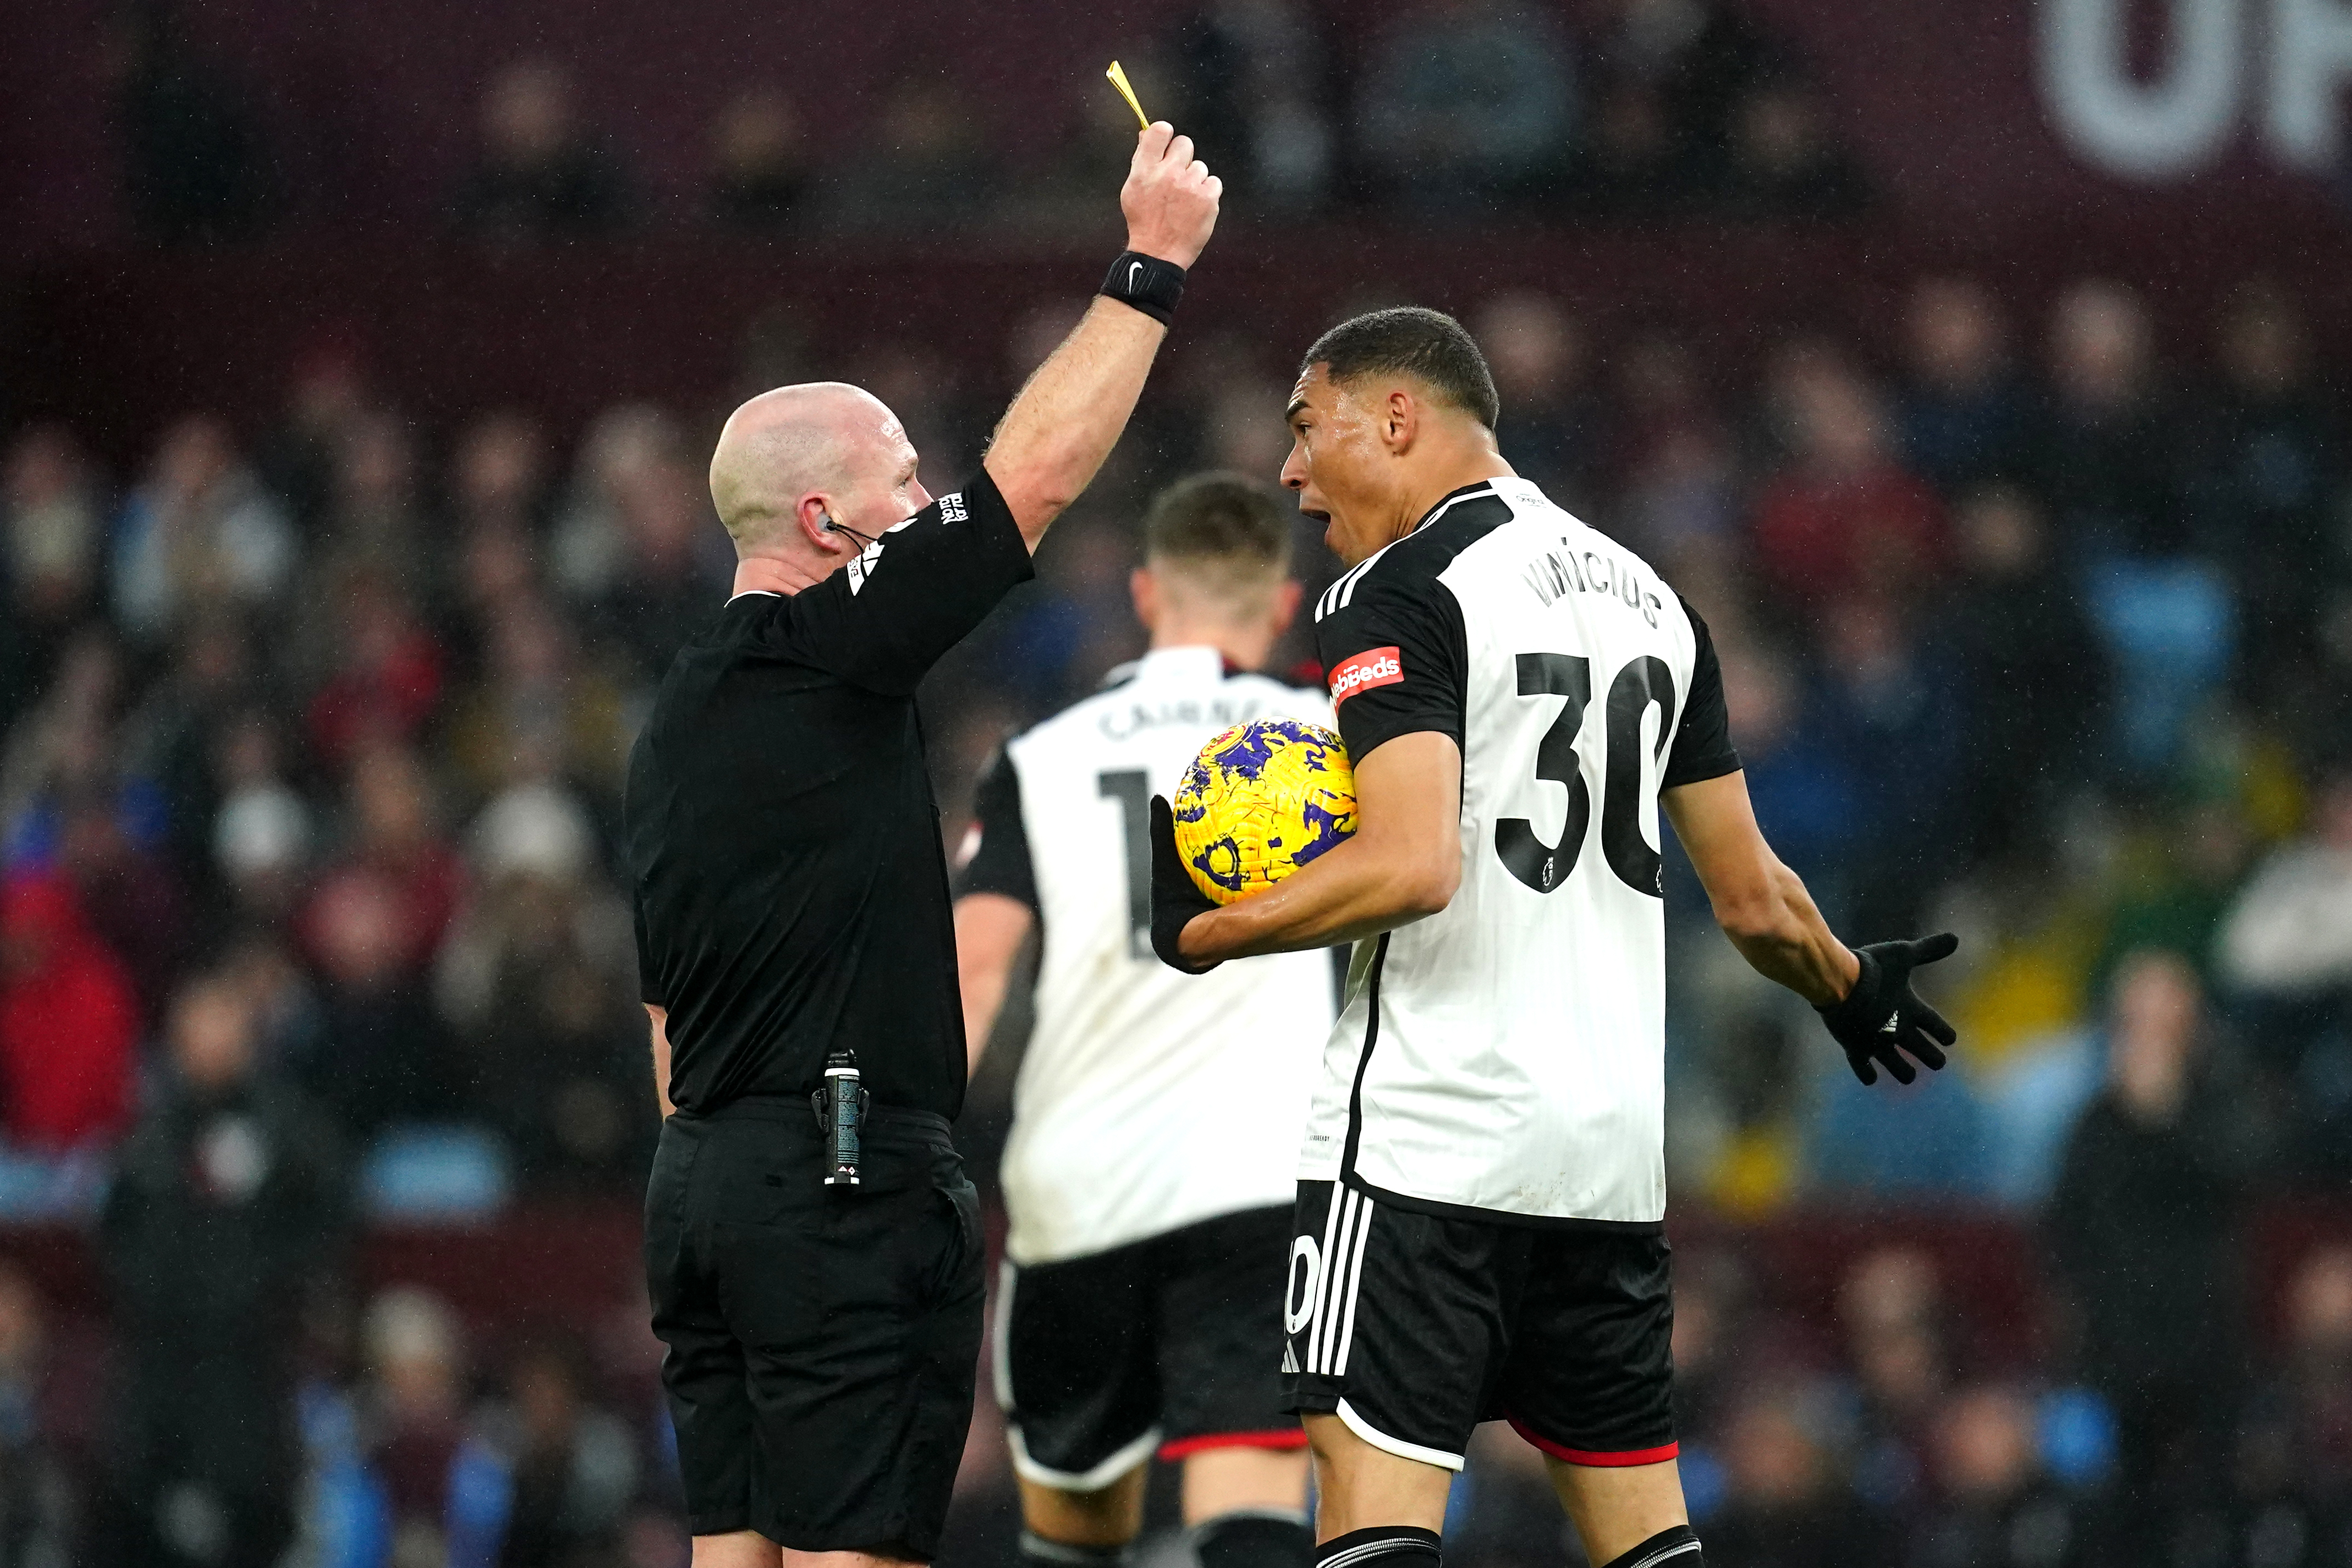 Referees have taken a tougher stance on dissent this season